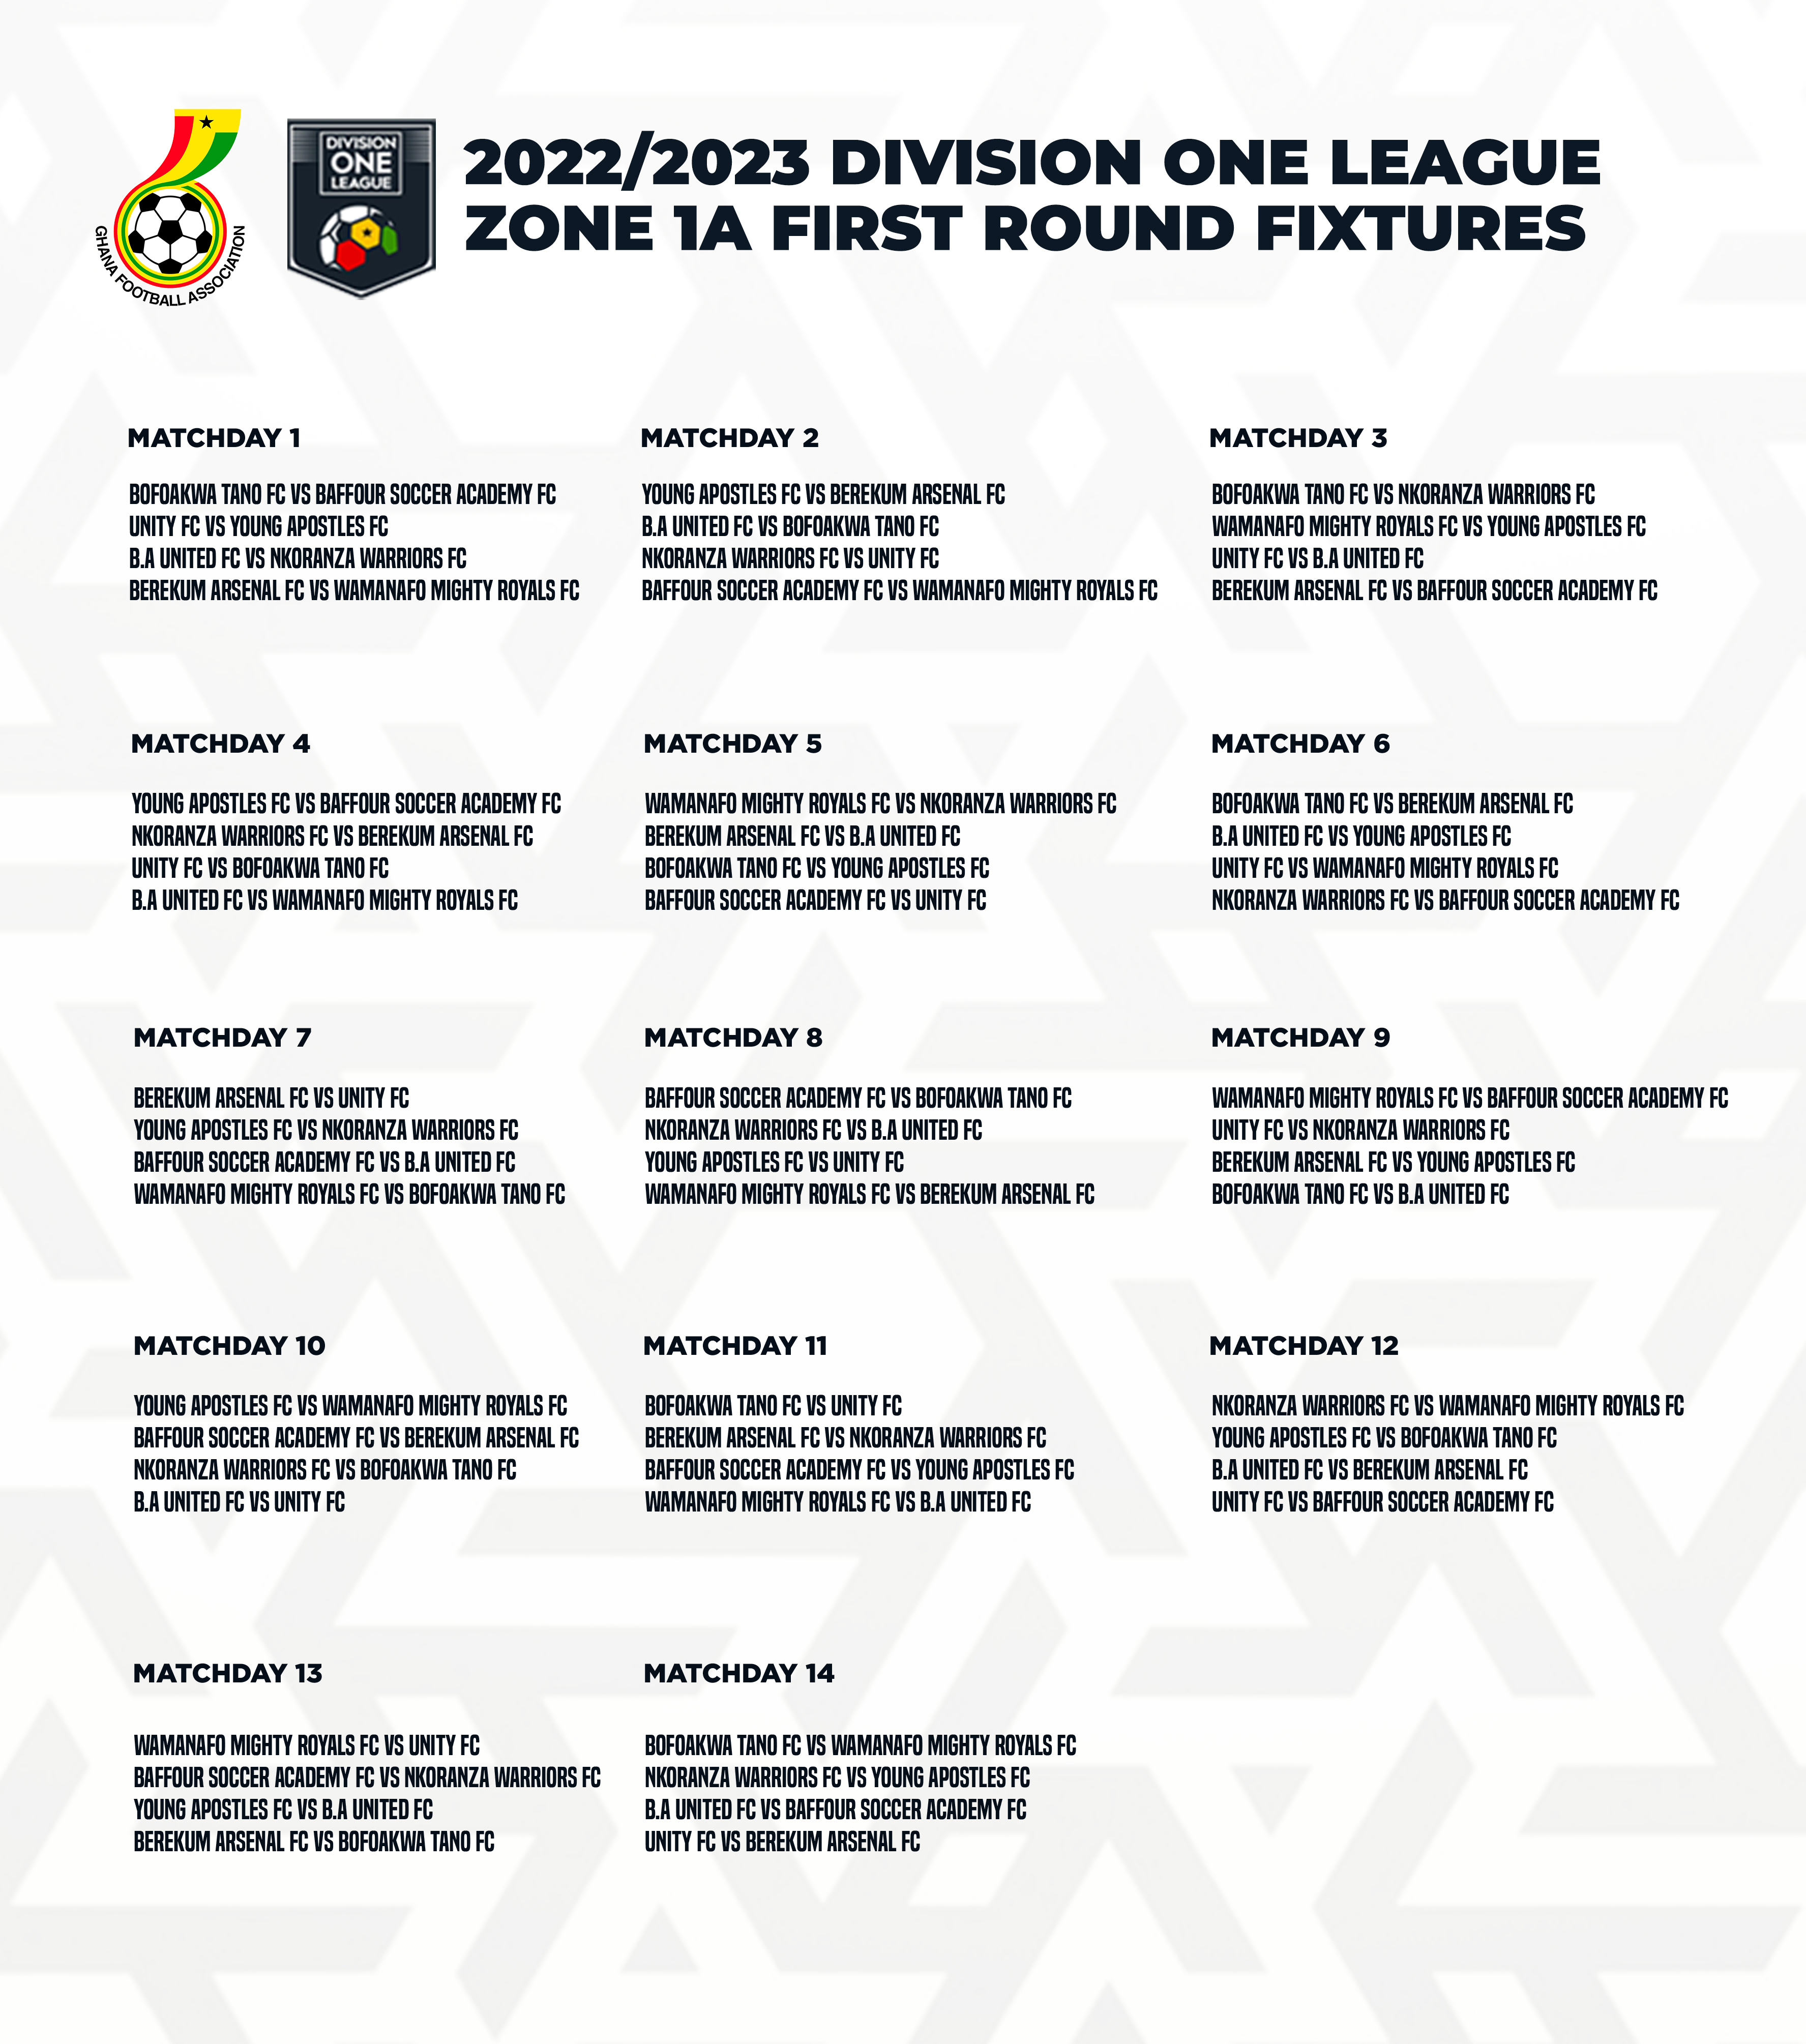 2022/23 Division One League fixtures - Zone 1A & 1B